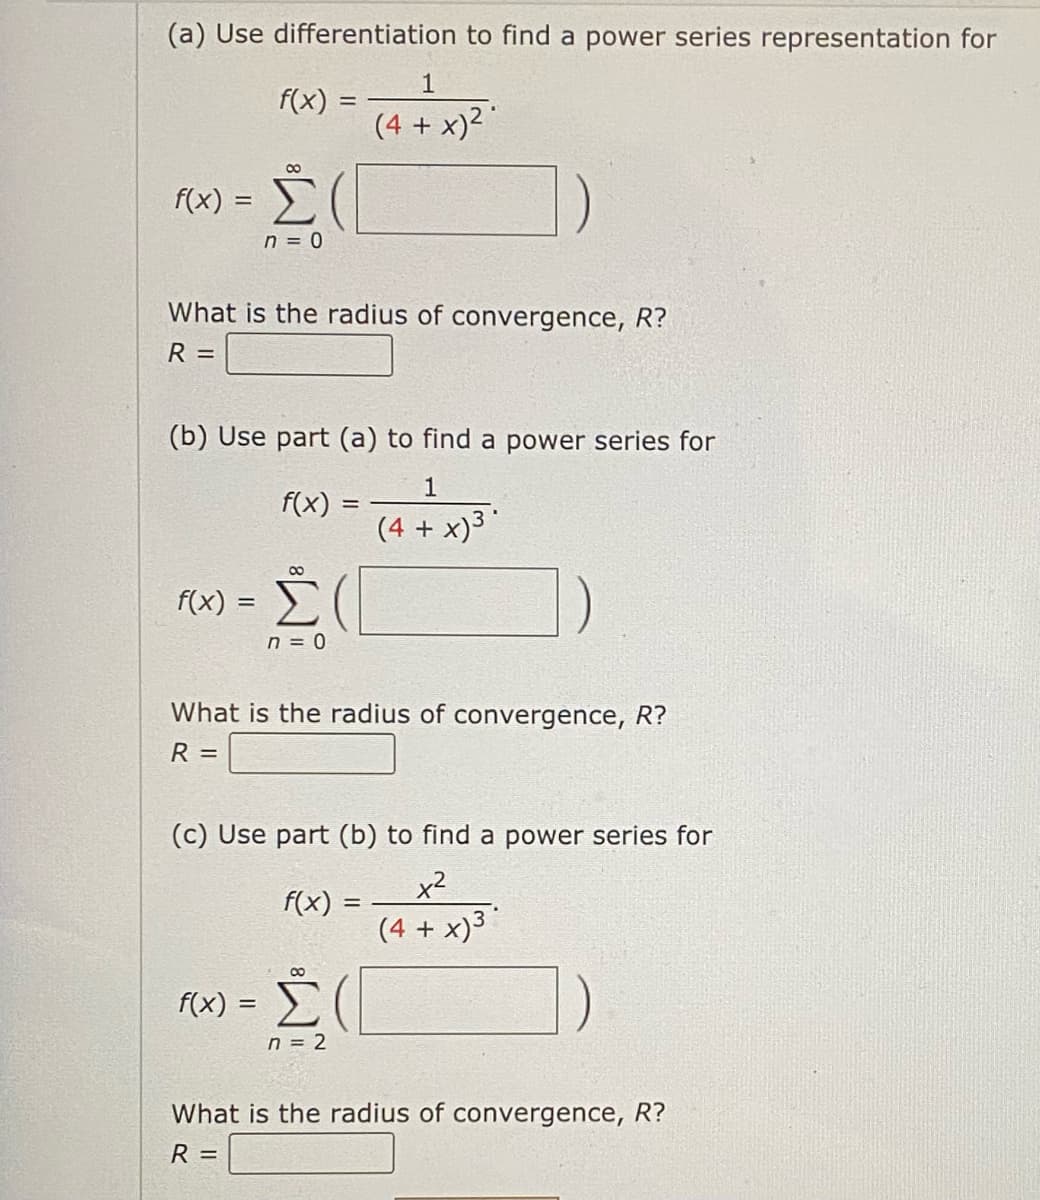 (a) Use differentiation to find a power series representation for
f(x) =
00
f(x) = Σ
n = 0
What is the radius of convergence, R?
R
=
(b) Use part (a) to find a power series for
1
(4 + x)³*
f(x) =
8
f(x) = [
n = 0
f(x) =
1
(4 + x)²
=
What is the radius of convergence, R?
R =
(c) Use part (b) to find a power series for
x²
(4 + x)³
f(x): =
n = 2
What is the radius of convergence, R?
R =